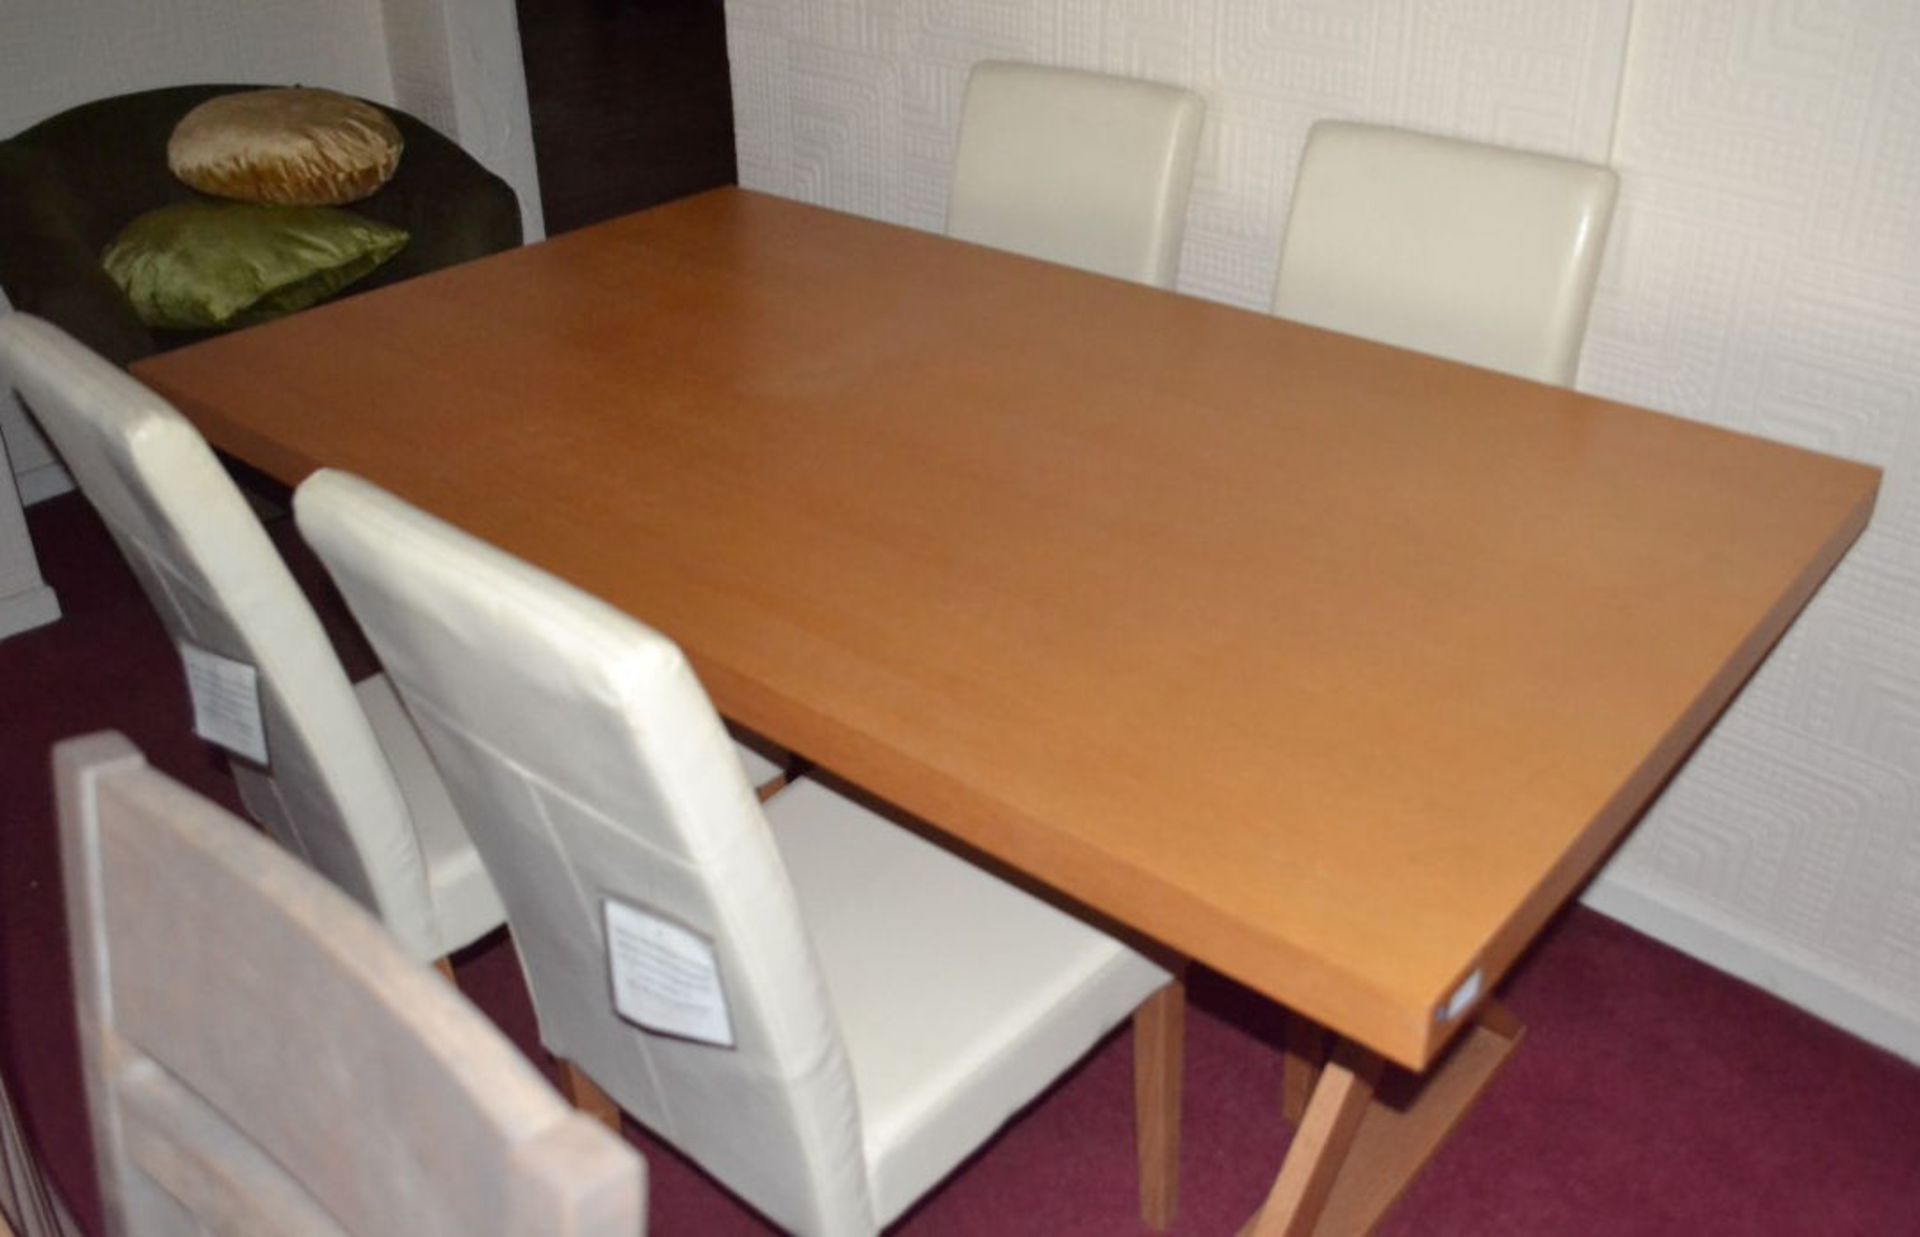 1 x Dining Table With 4 Cream Chairs. Length 160cm, Width 90cm, Height 77cm.